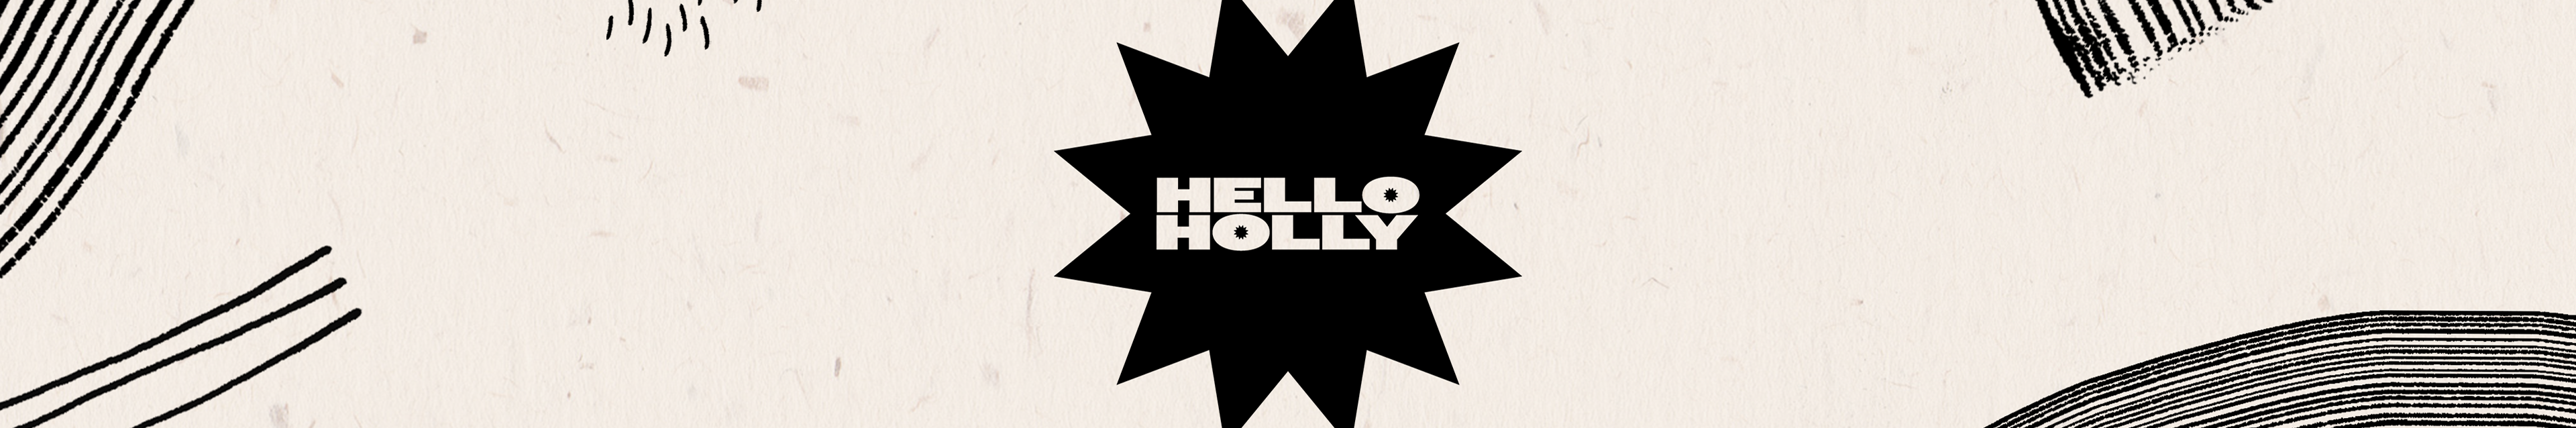 Holly Madeline's profile banner